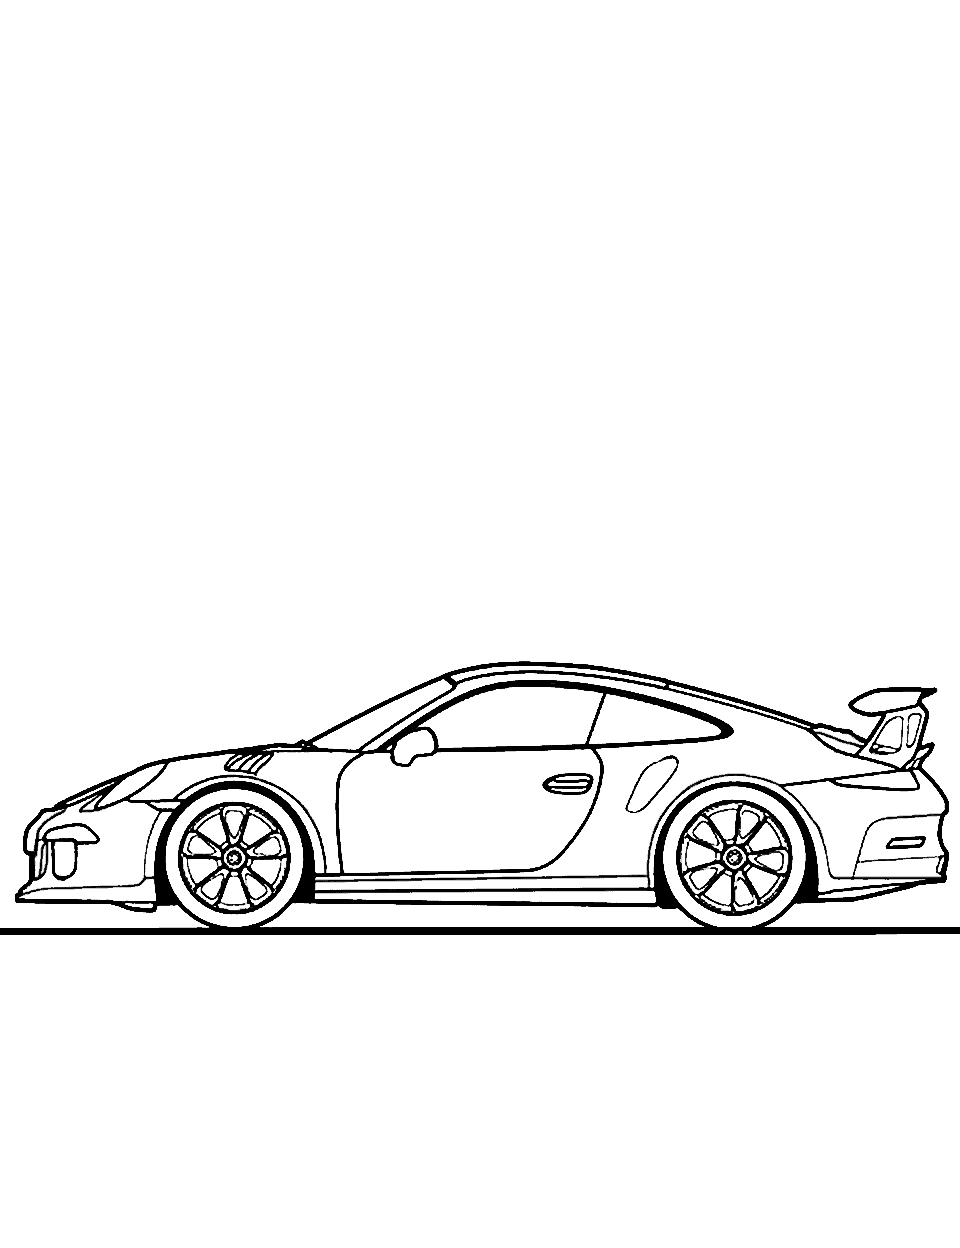 Side View Speedster Race Car Coloring Page - A race car in side view, showing off its aerodynamic design.